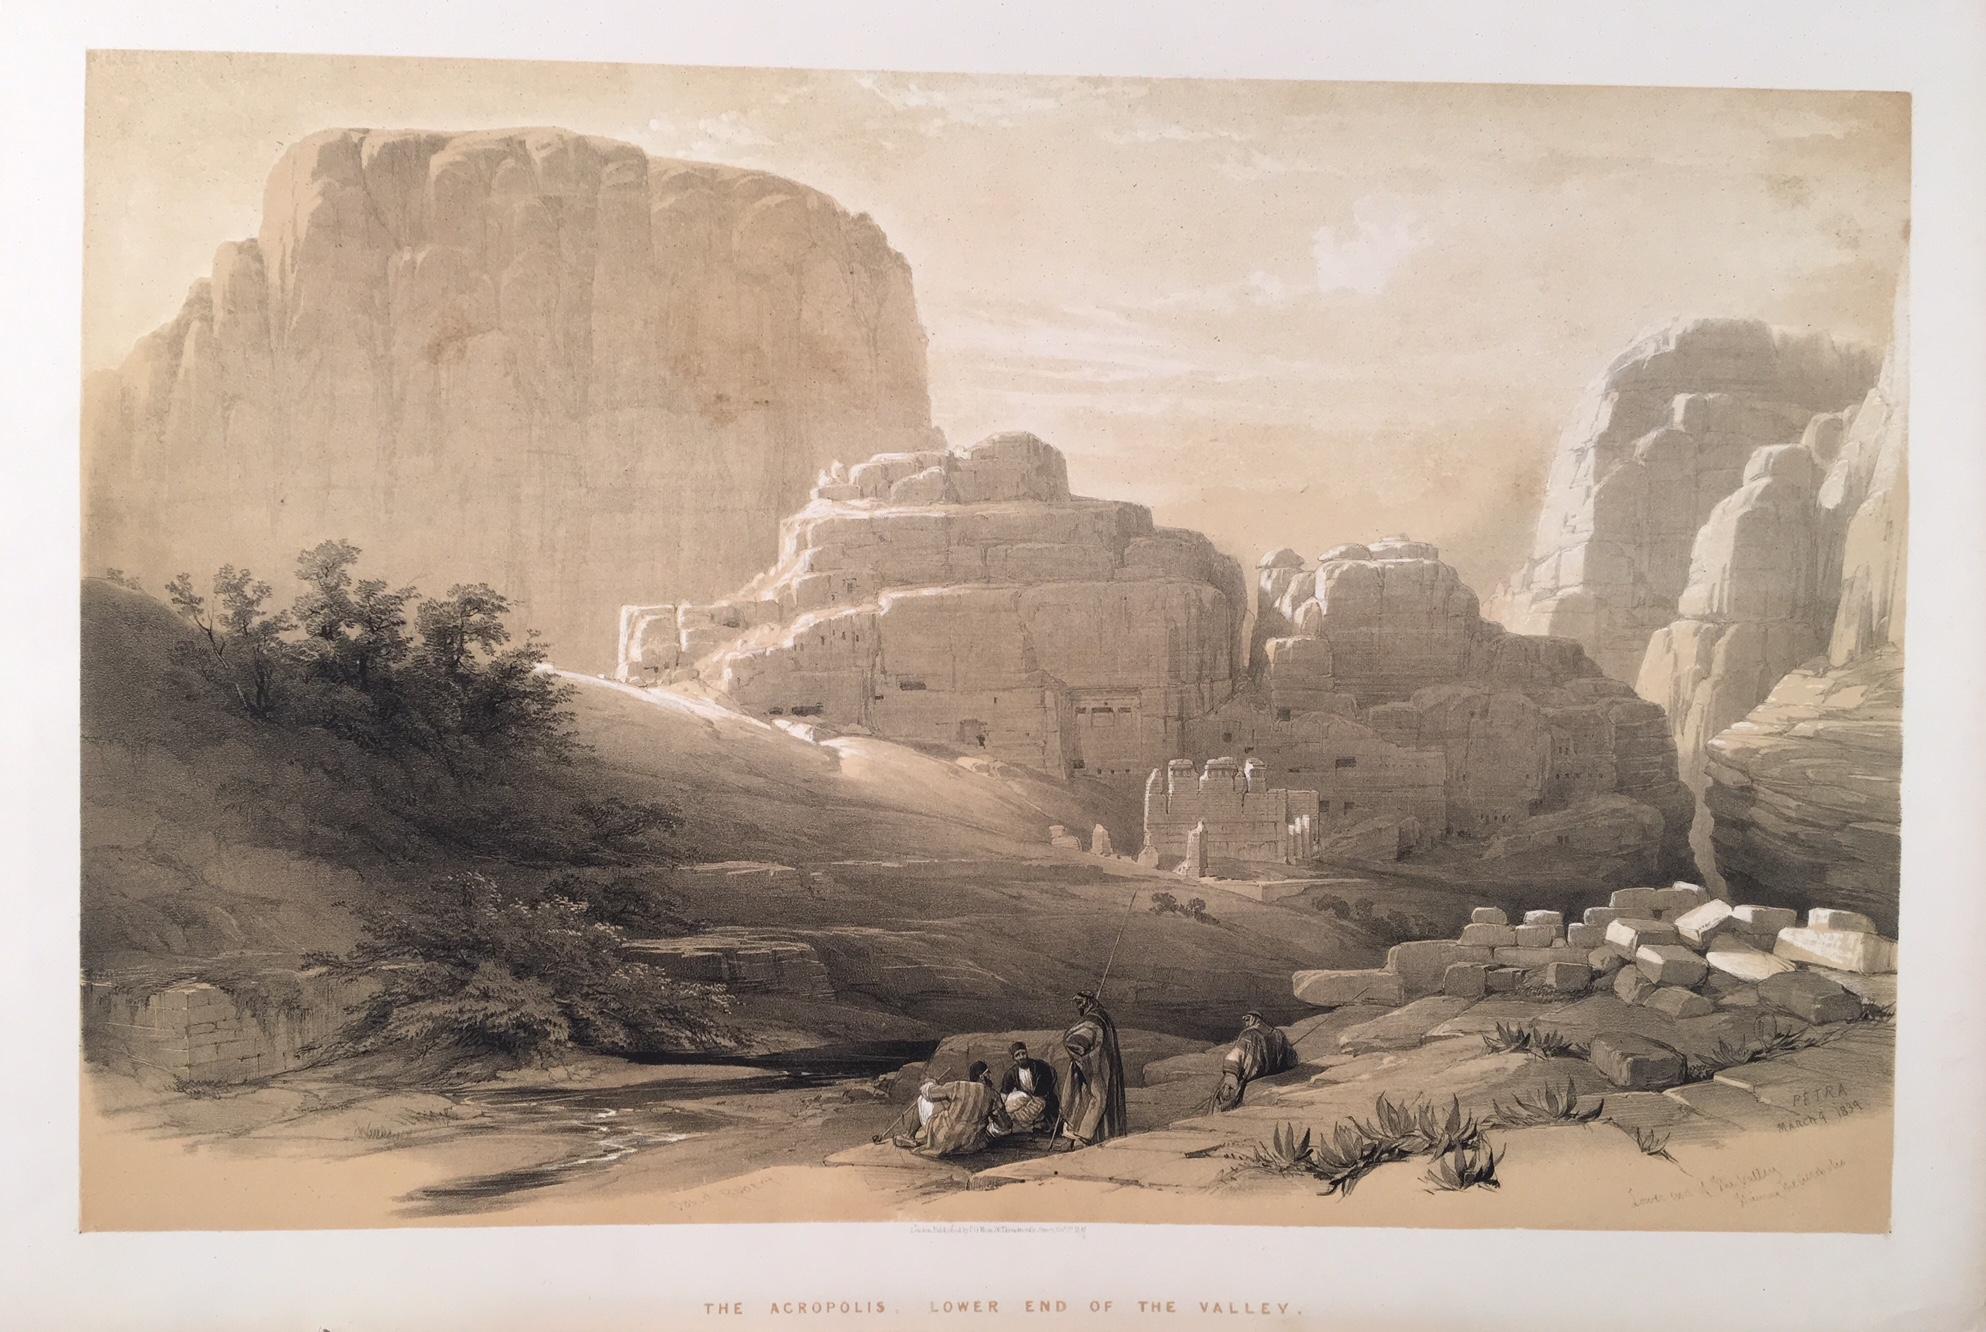 David Roberts Landscape Print - The Acropolis, Lower End of the Valley  (of Petra)